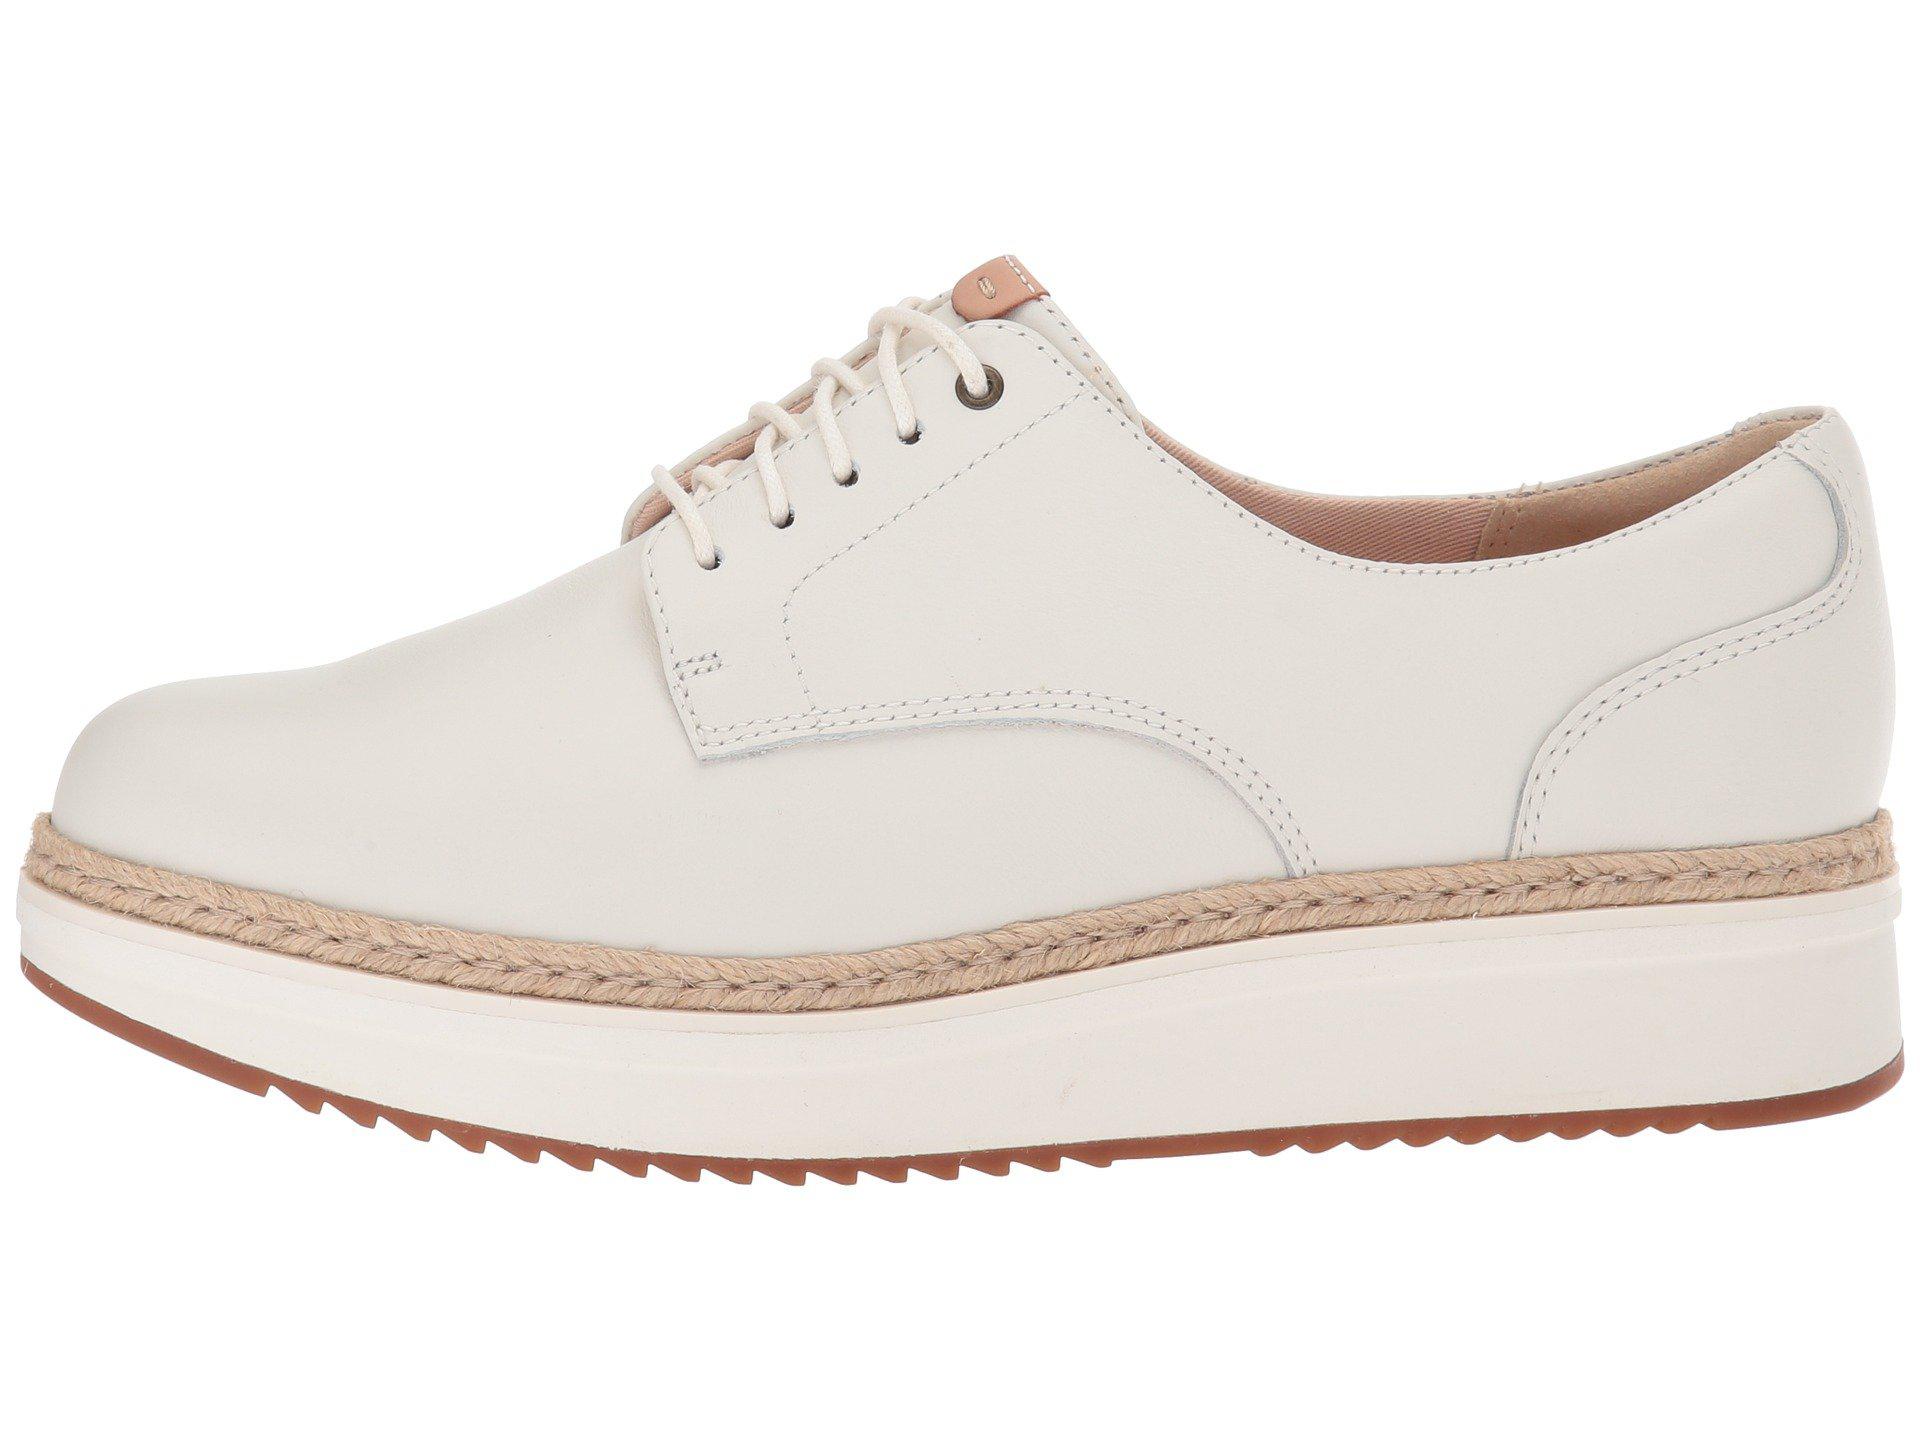 Clarks Leather Teadale Rhea in White Leather (White) - Lyst